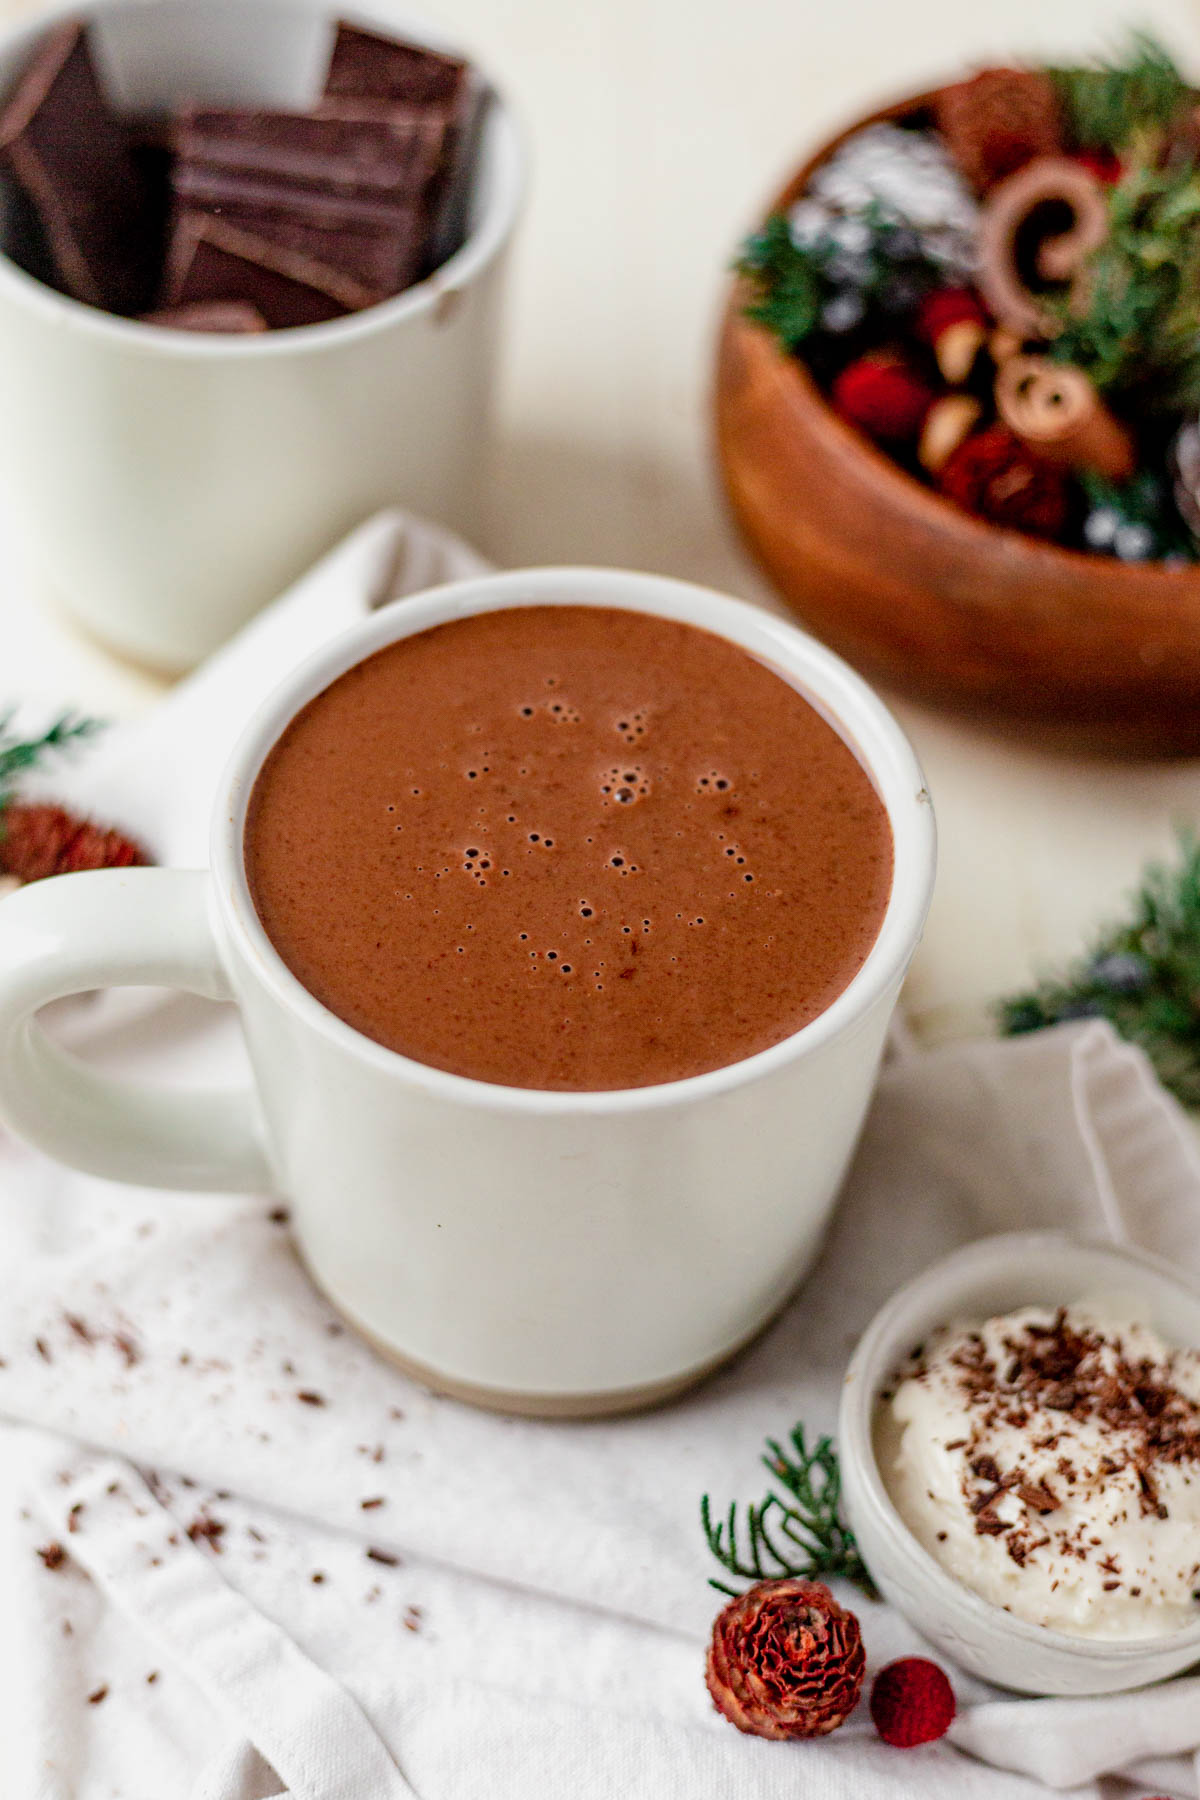 creamy dairy-free hot chocolate in a white mug next to holiday greenery and chopped chocolate